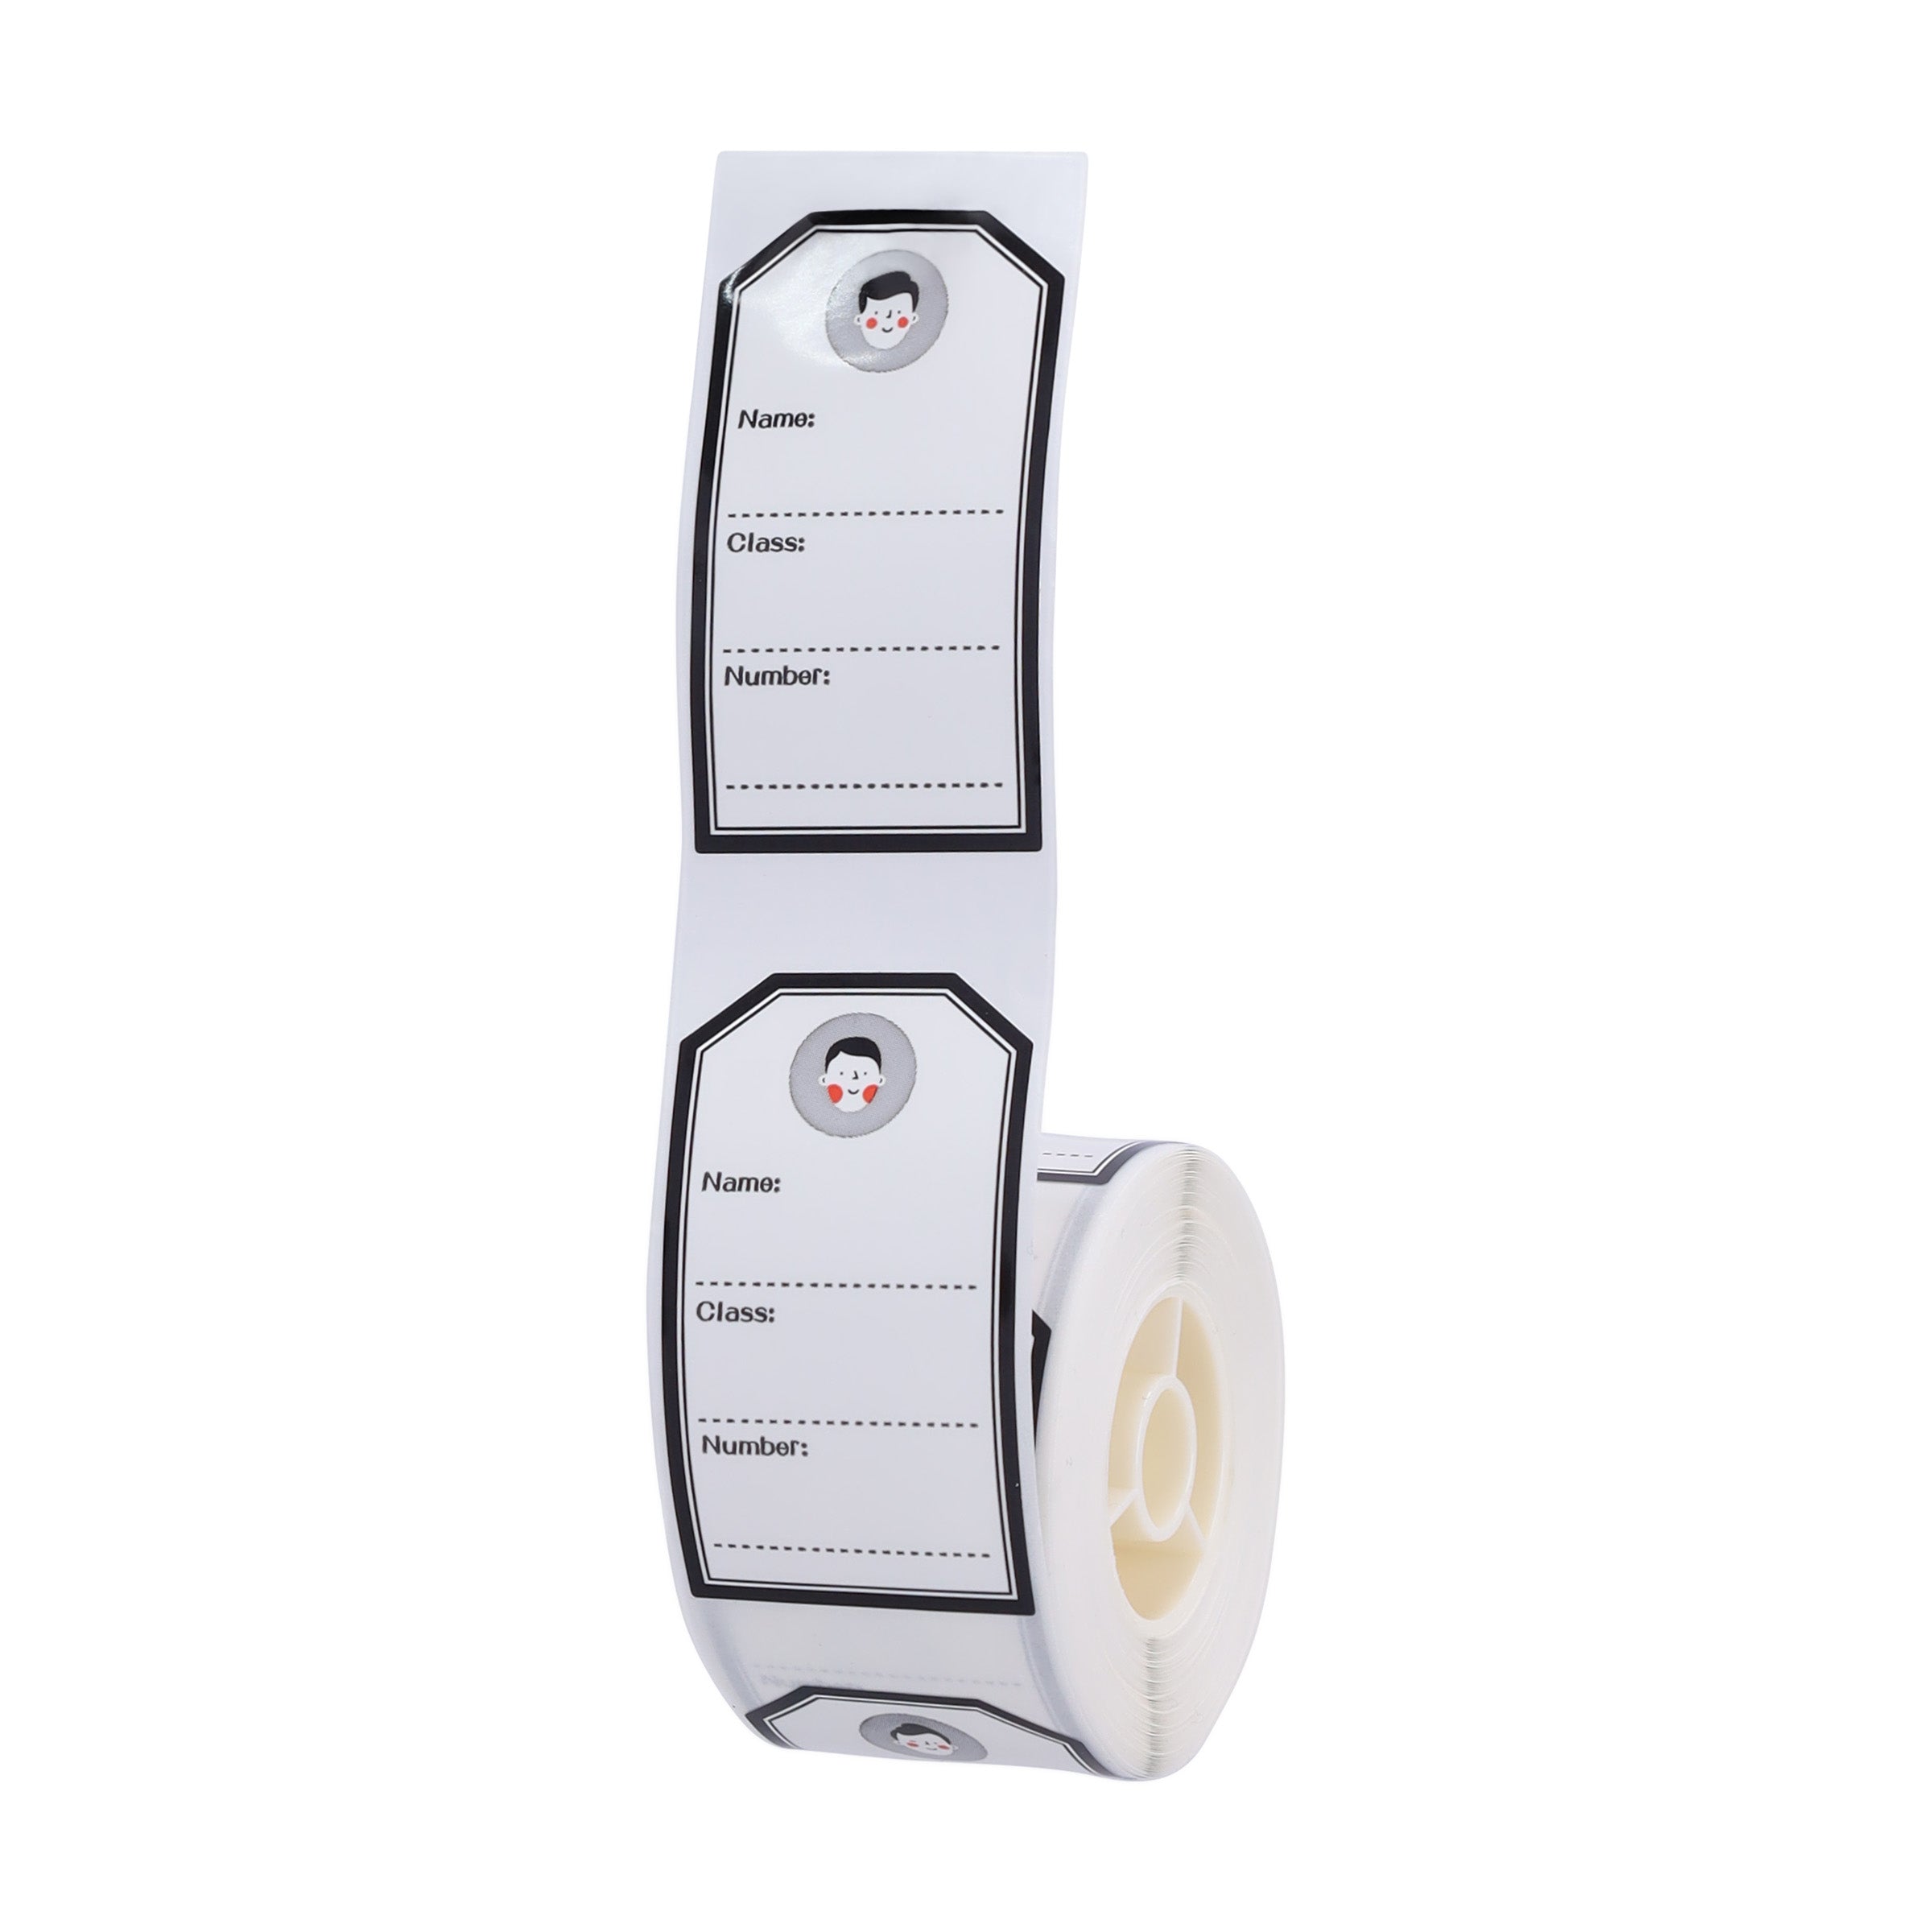 NB364 - NIIMBOT - D101 ONLY - R25*45 - 150 LABELS PER ROLL - YOUNG BOY DESIGN